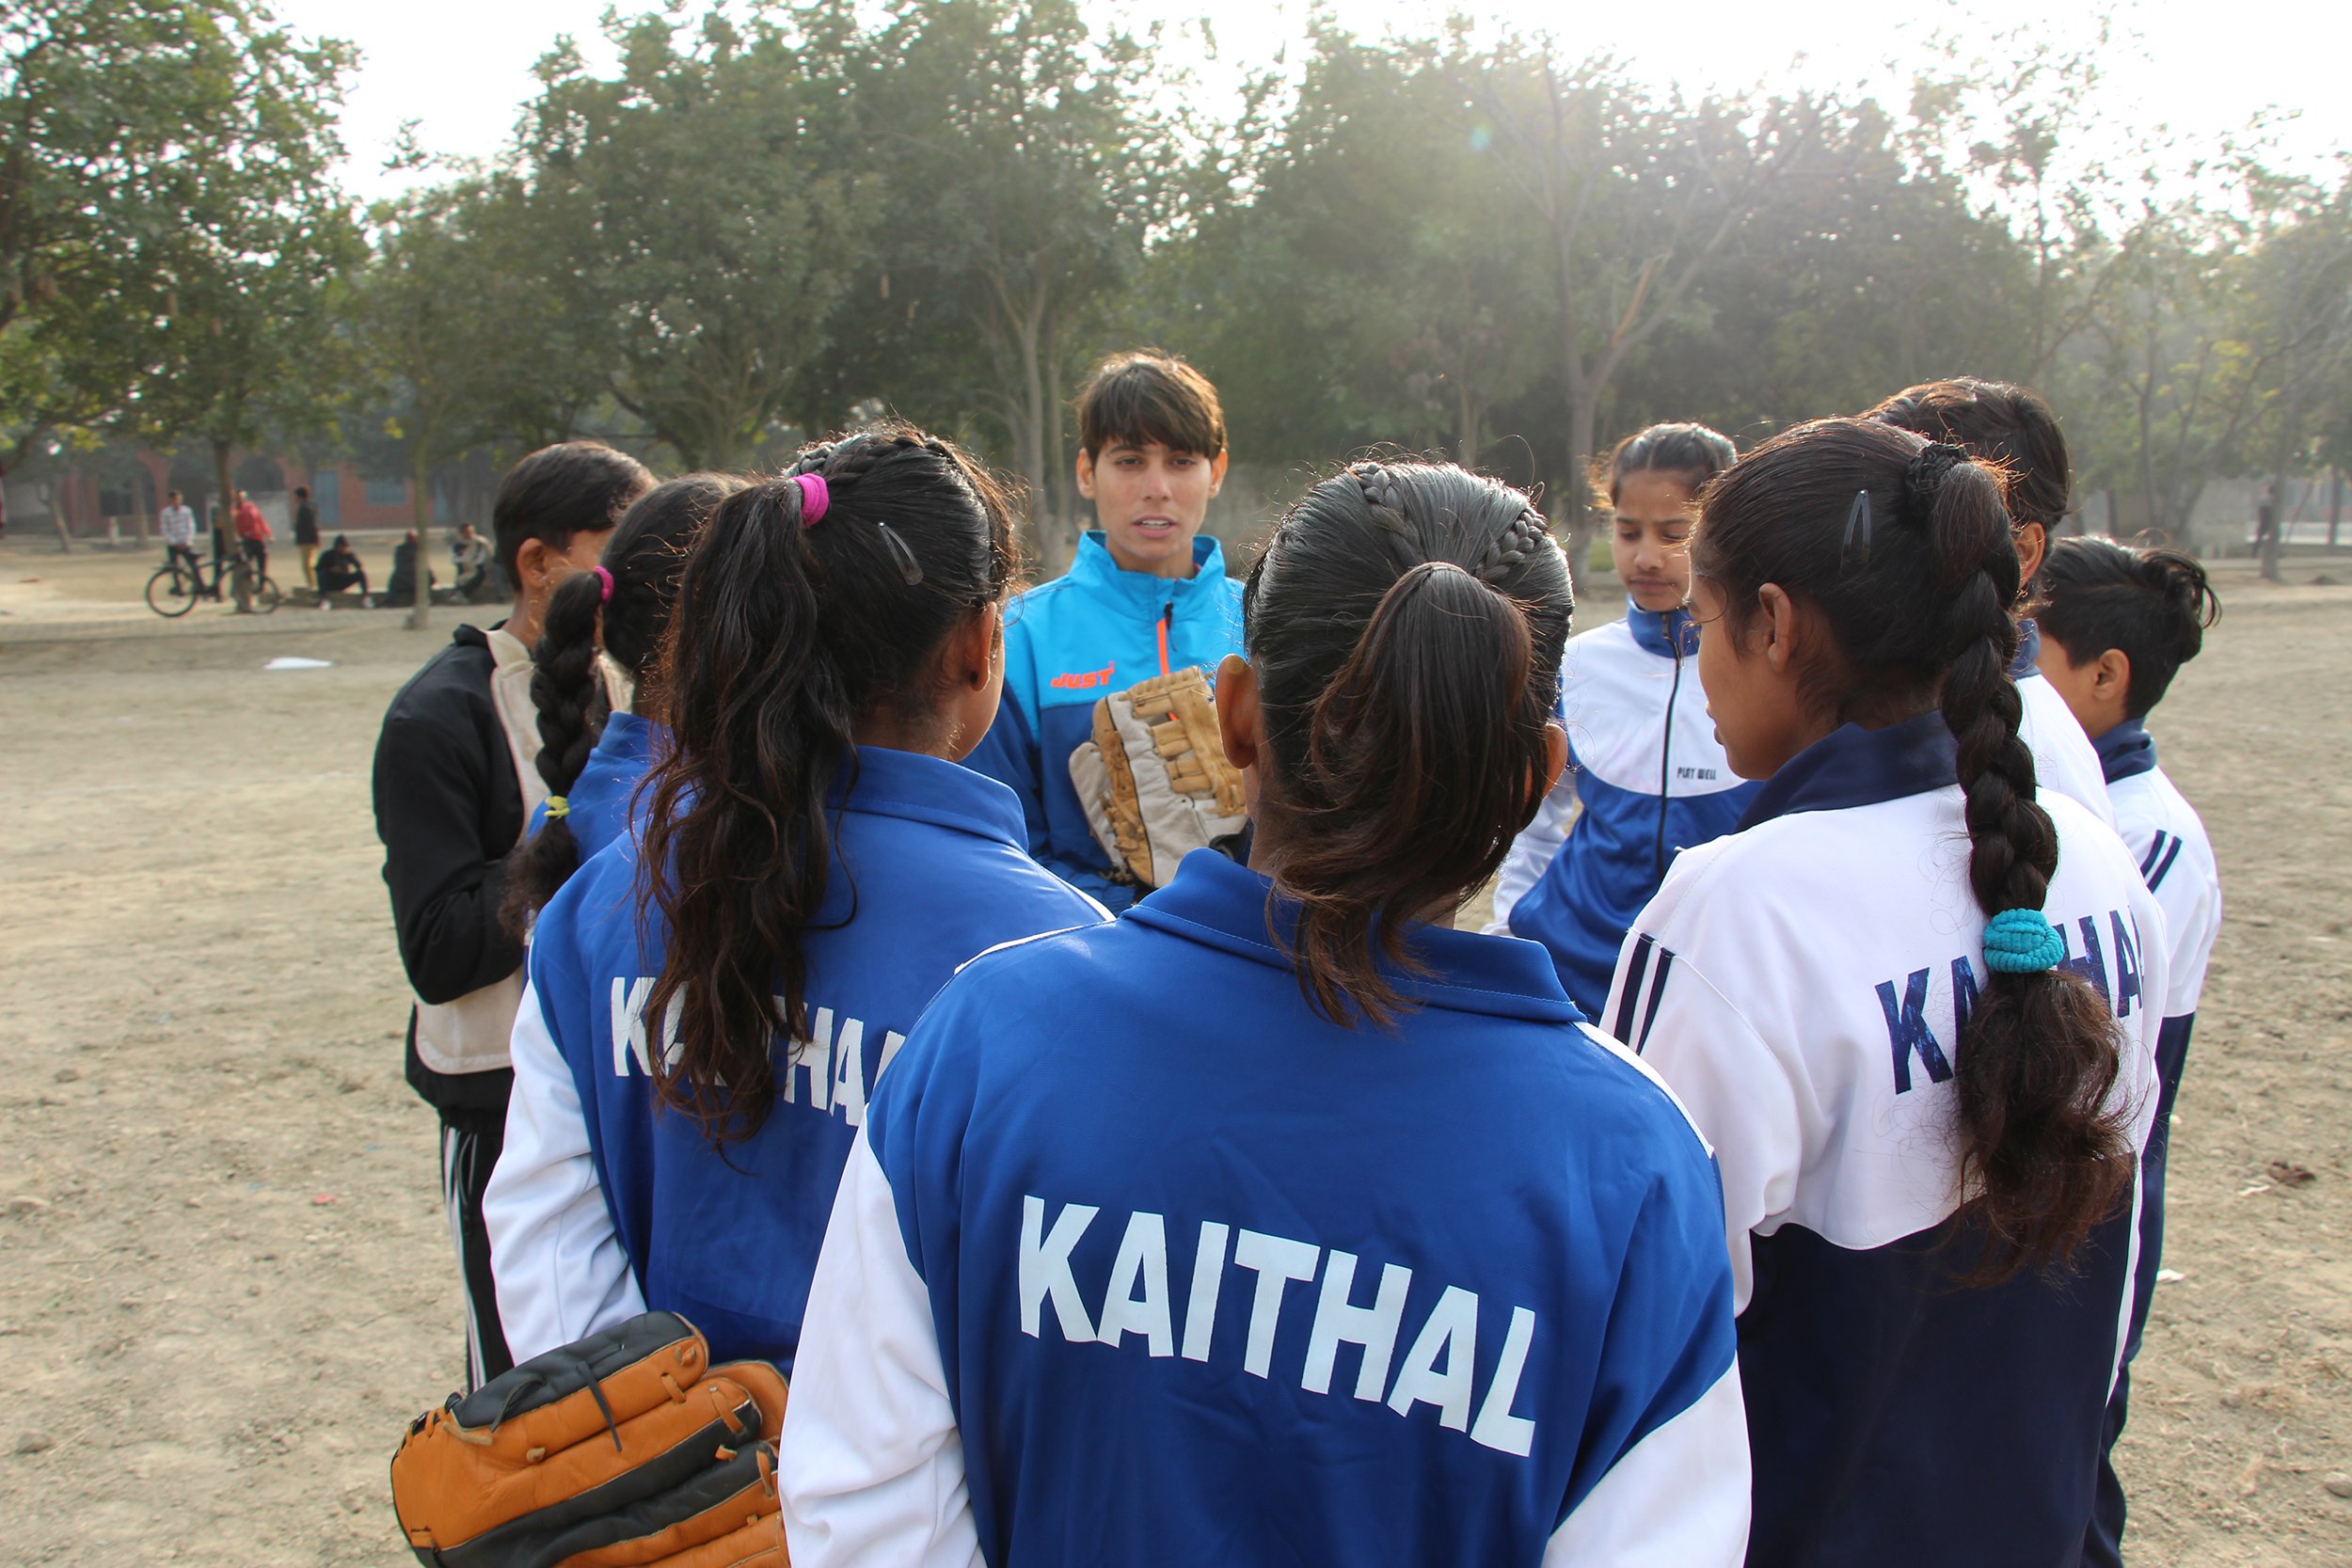  Jyoti Sain gathers 23 girls to play baseball on a weekly basis in the dirt fields of Peoda, Haryana, Jan. 9. Jyoti has always loved coaching and playing baseball, so to help these boys and girls play and learn makes her nothing but happy. “[Girls] w